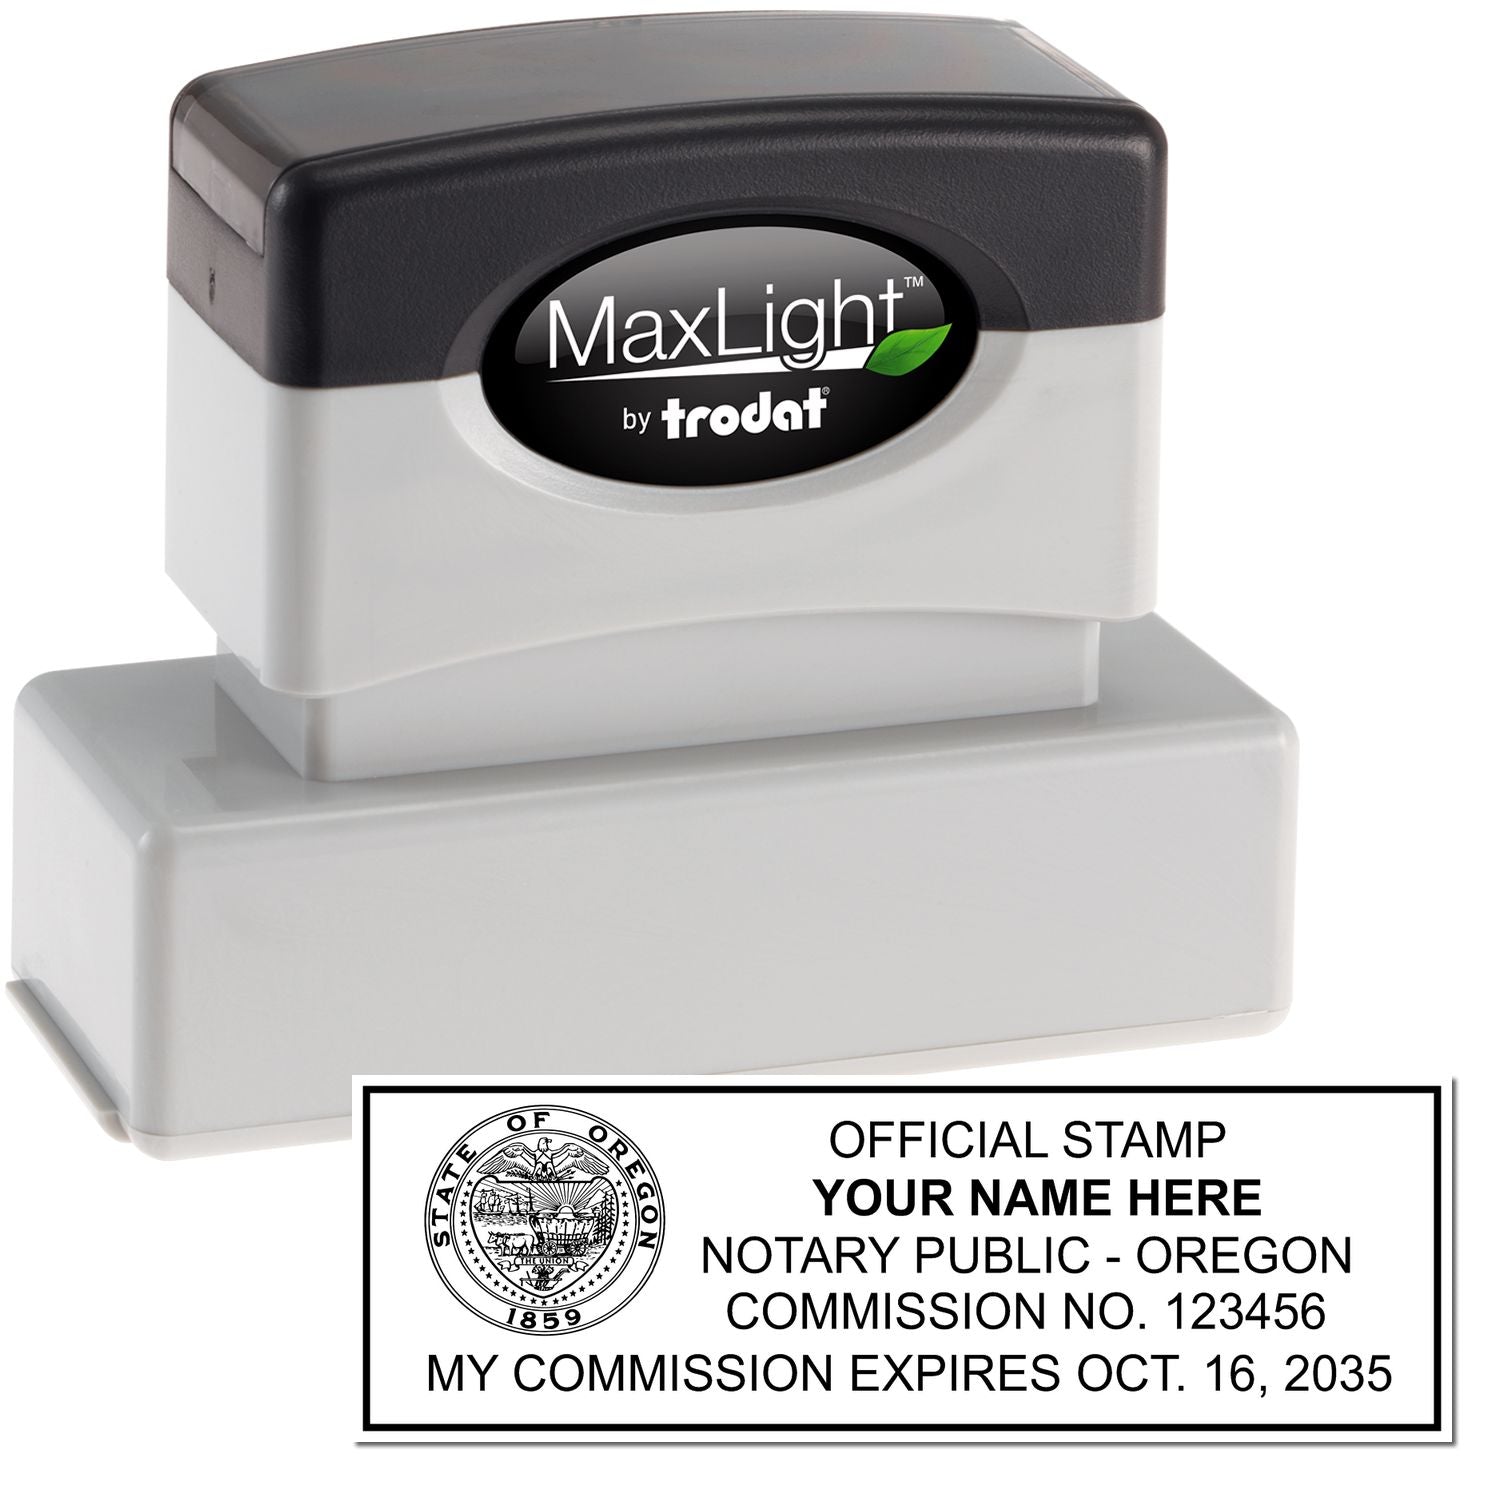 The main image for the MaxLight Premium Pre-Inked Oregon Rectangular Notarial Stamp depicting a sample of the imprint and electronic files